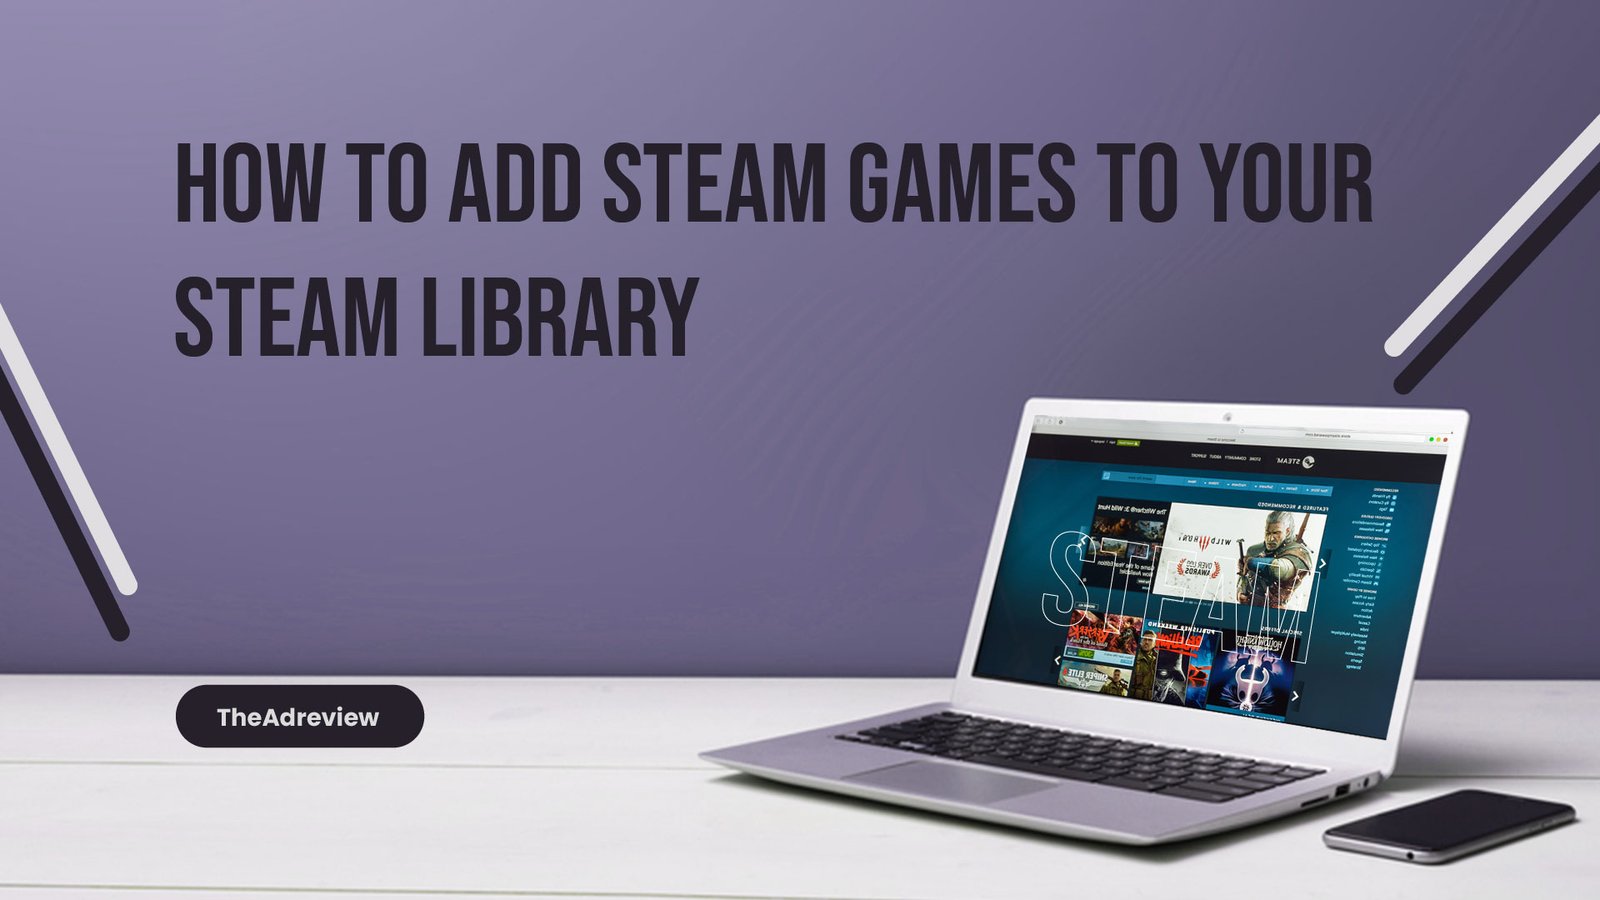 How To Add Steam Games To Your Steam Library 01 